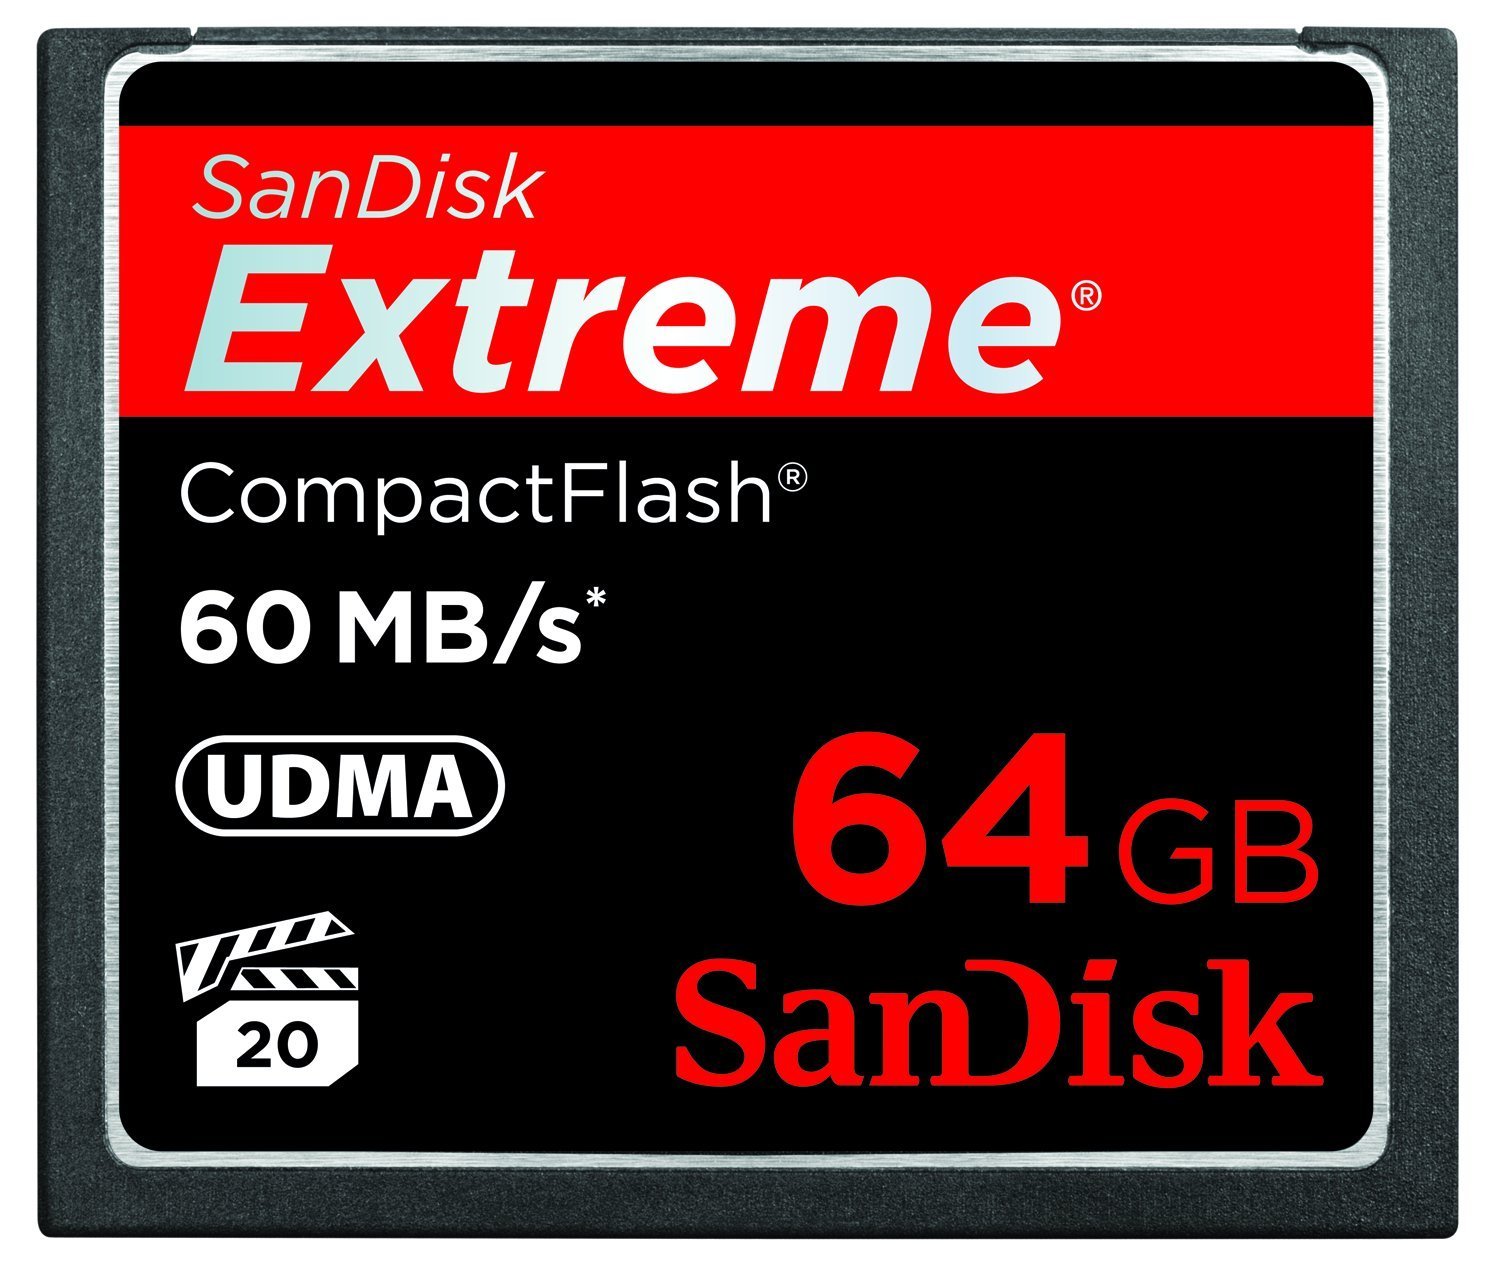 SanDisk Extreme CompactFlash 64 GB Memory Card 60MB/s SDCFX - 06